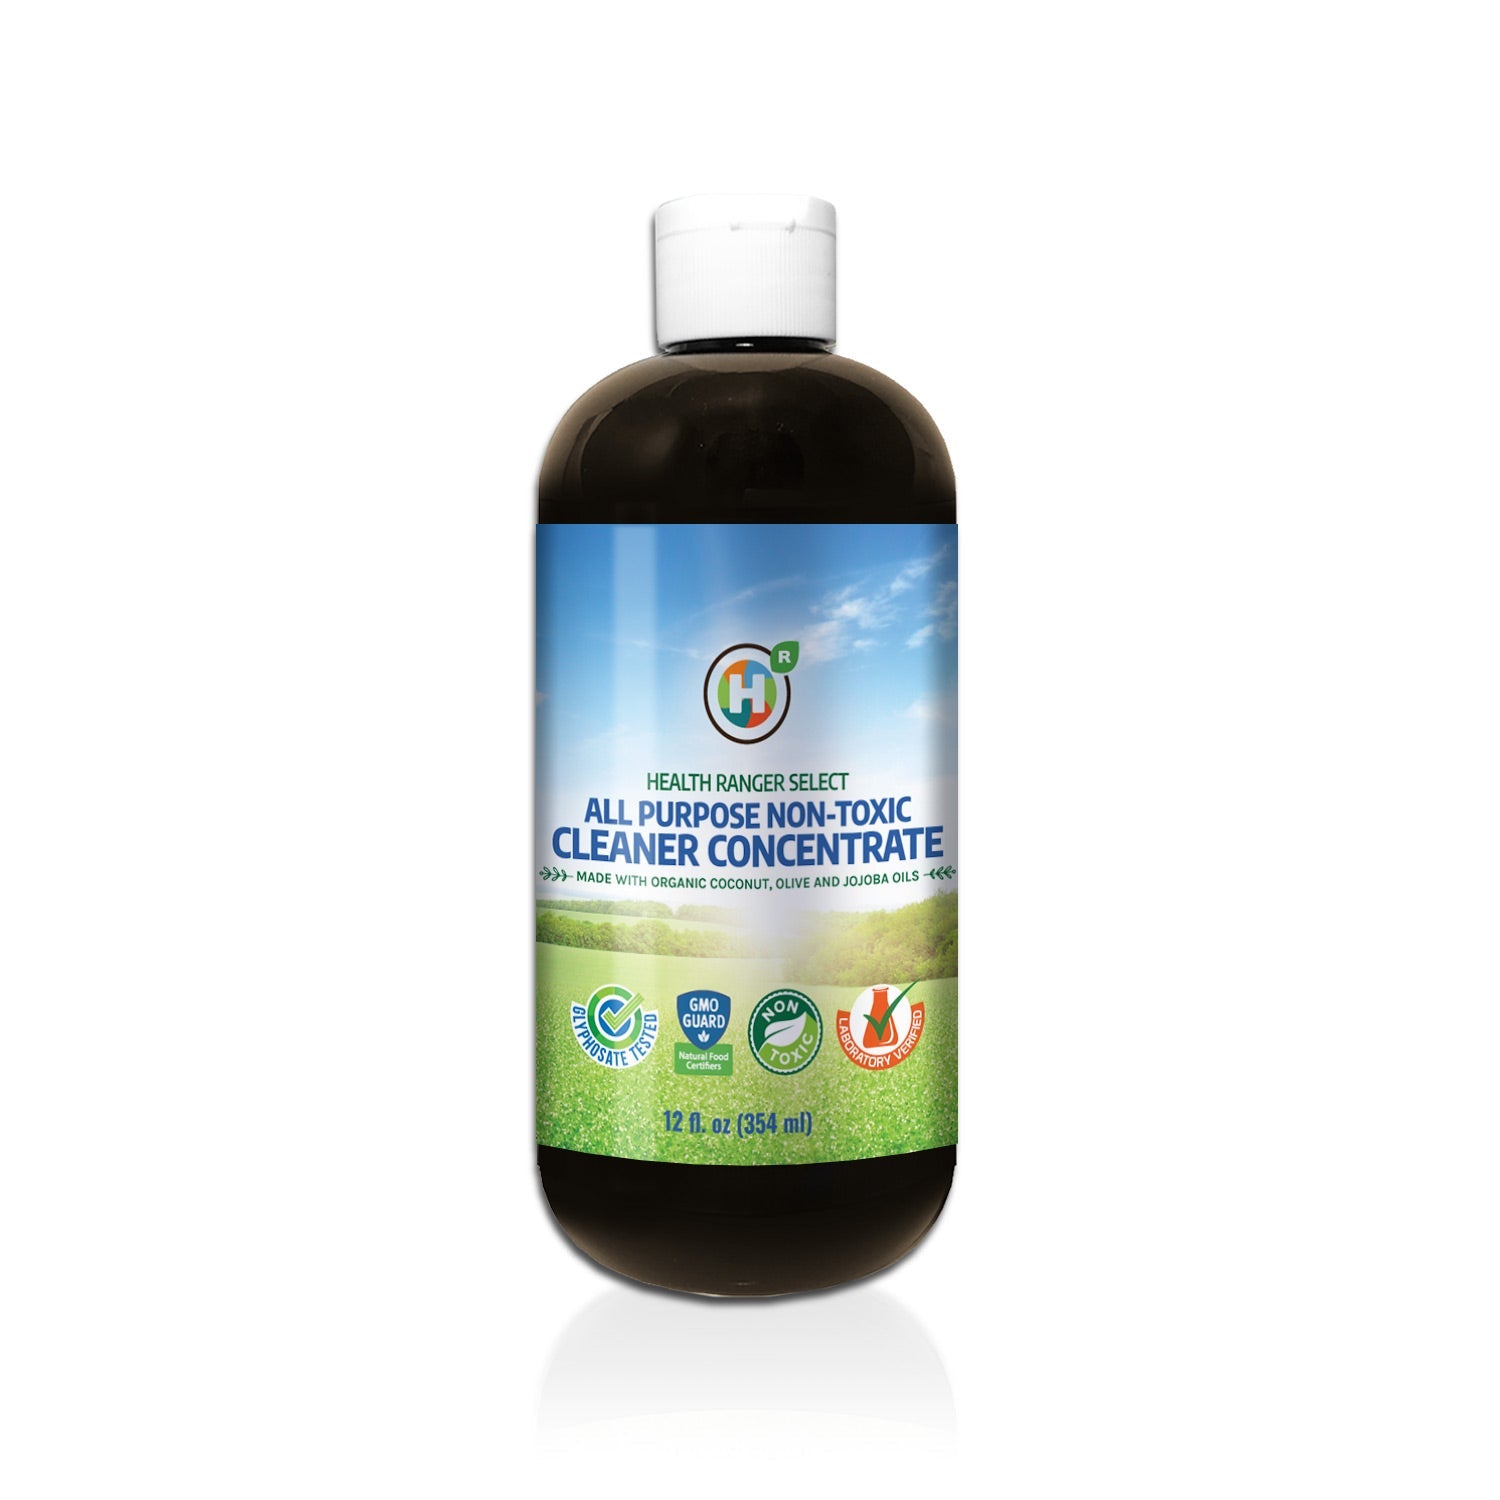 All Purpose Non-Toxic Cleaner Concentrate 12oz (354ml) (Made with Organic Coconut, Olive and Jojoba Oils)